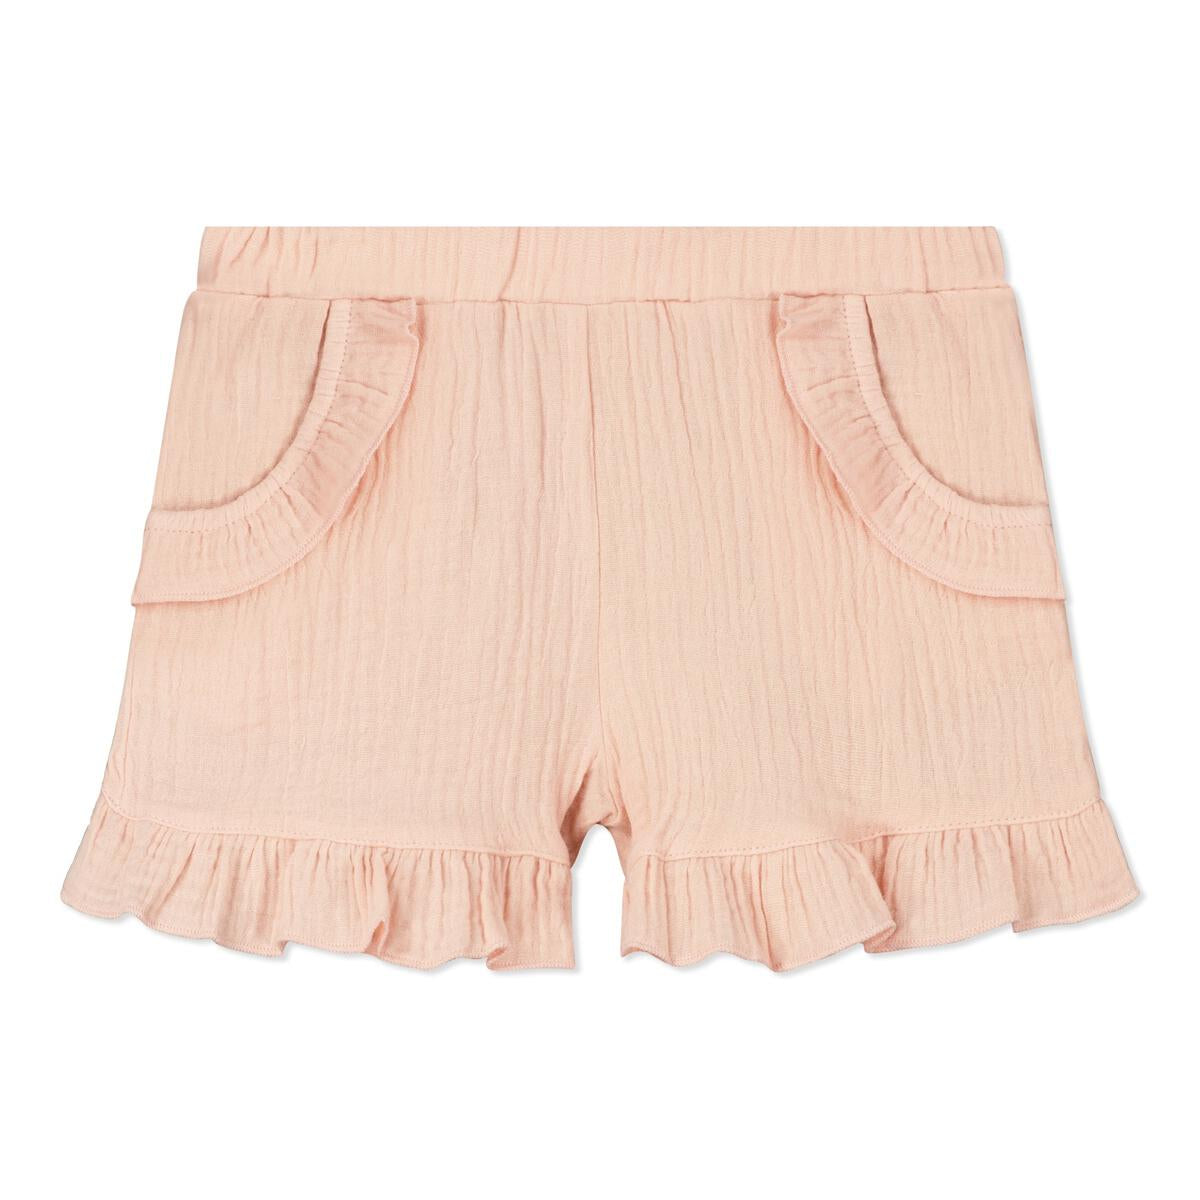 Pink Gauze Lyra Shorts. These shorts are a must have. Made with our lightweight gauze, these shorts have an elastic waist and adorable frill hem and pockets.